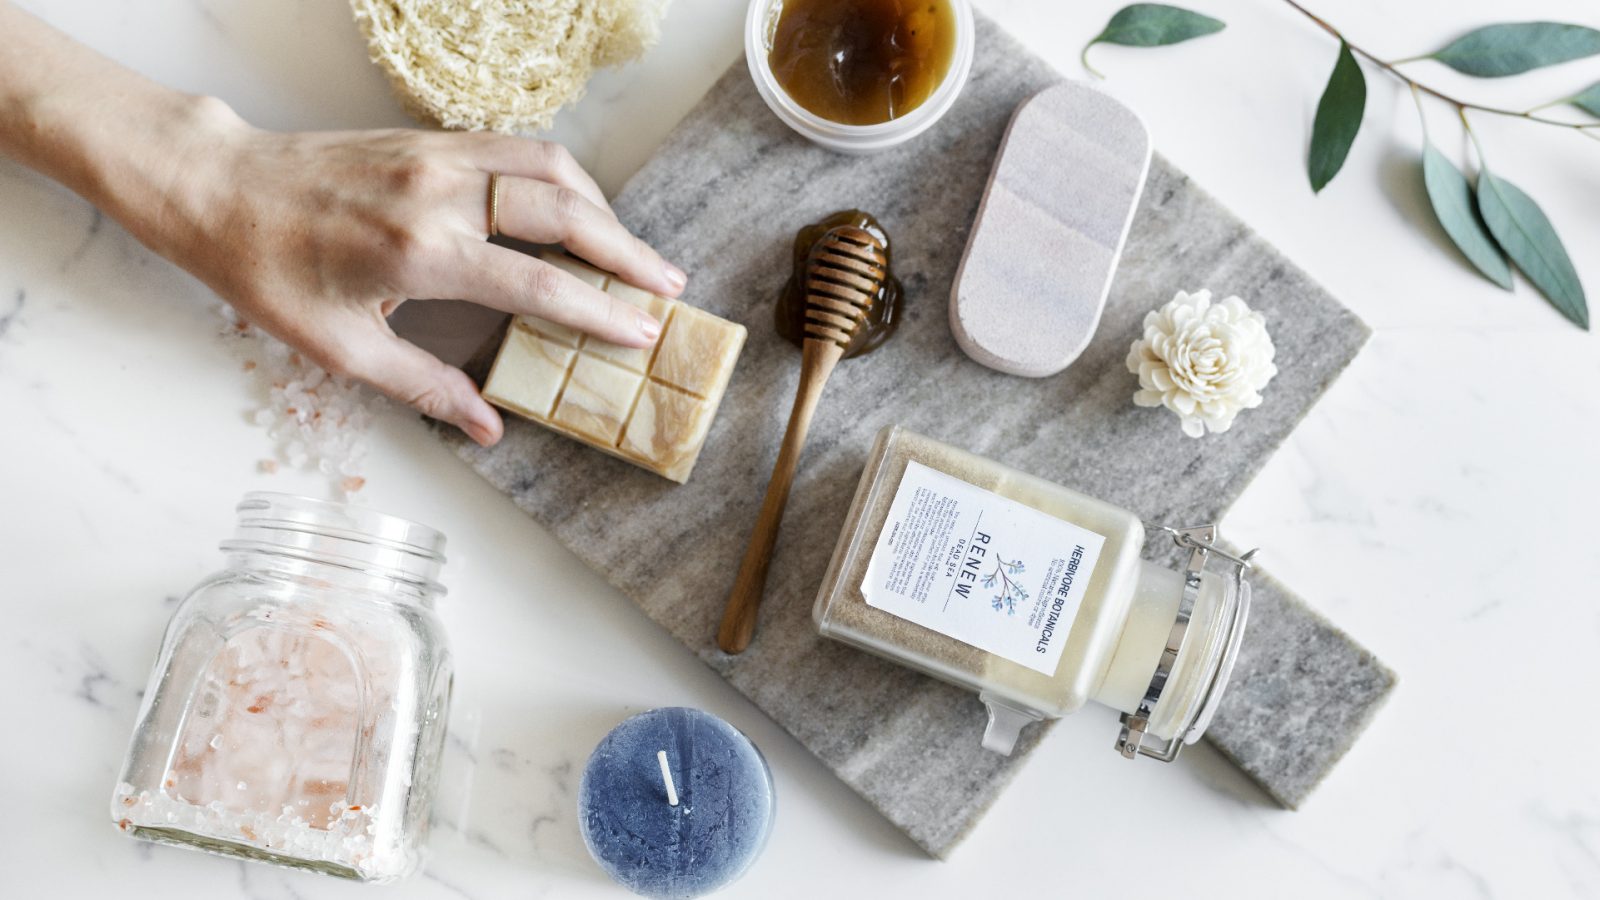 A person's hand reaching for a bar of soap on a marble countertop surrounded by various spa items including a honey dipper, candles, scrub, salt, and a small white flower designed for brand